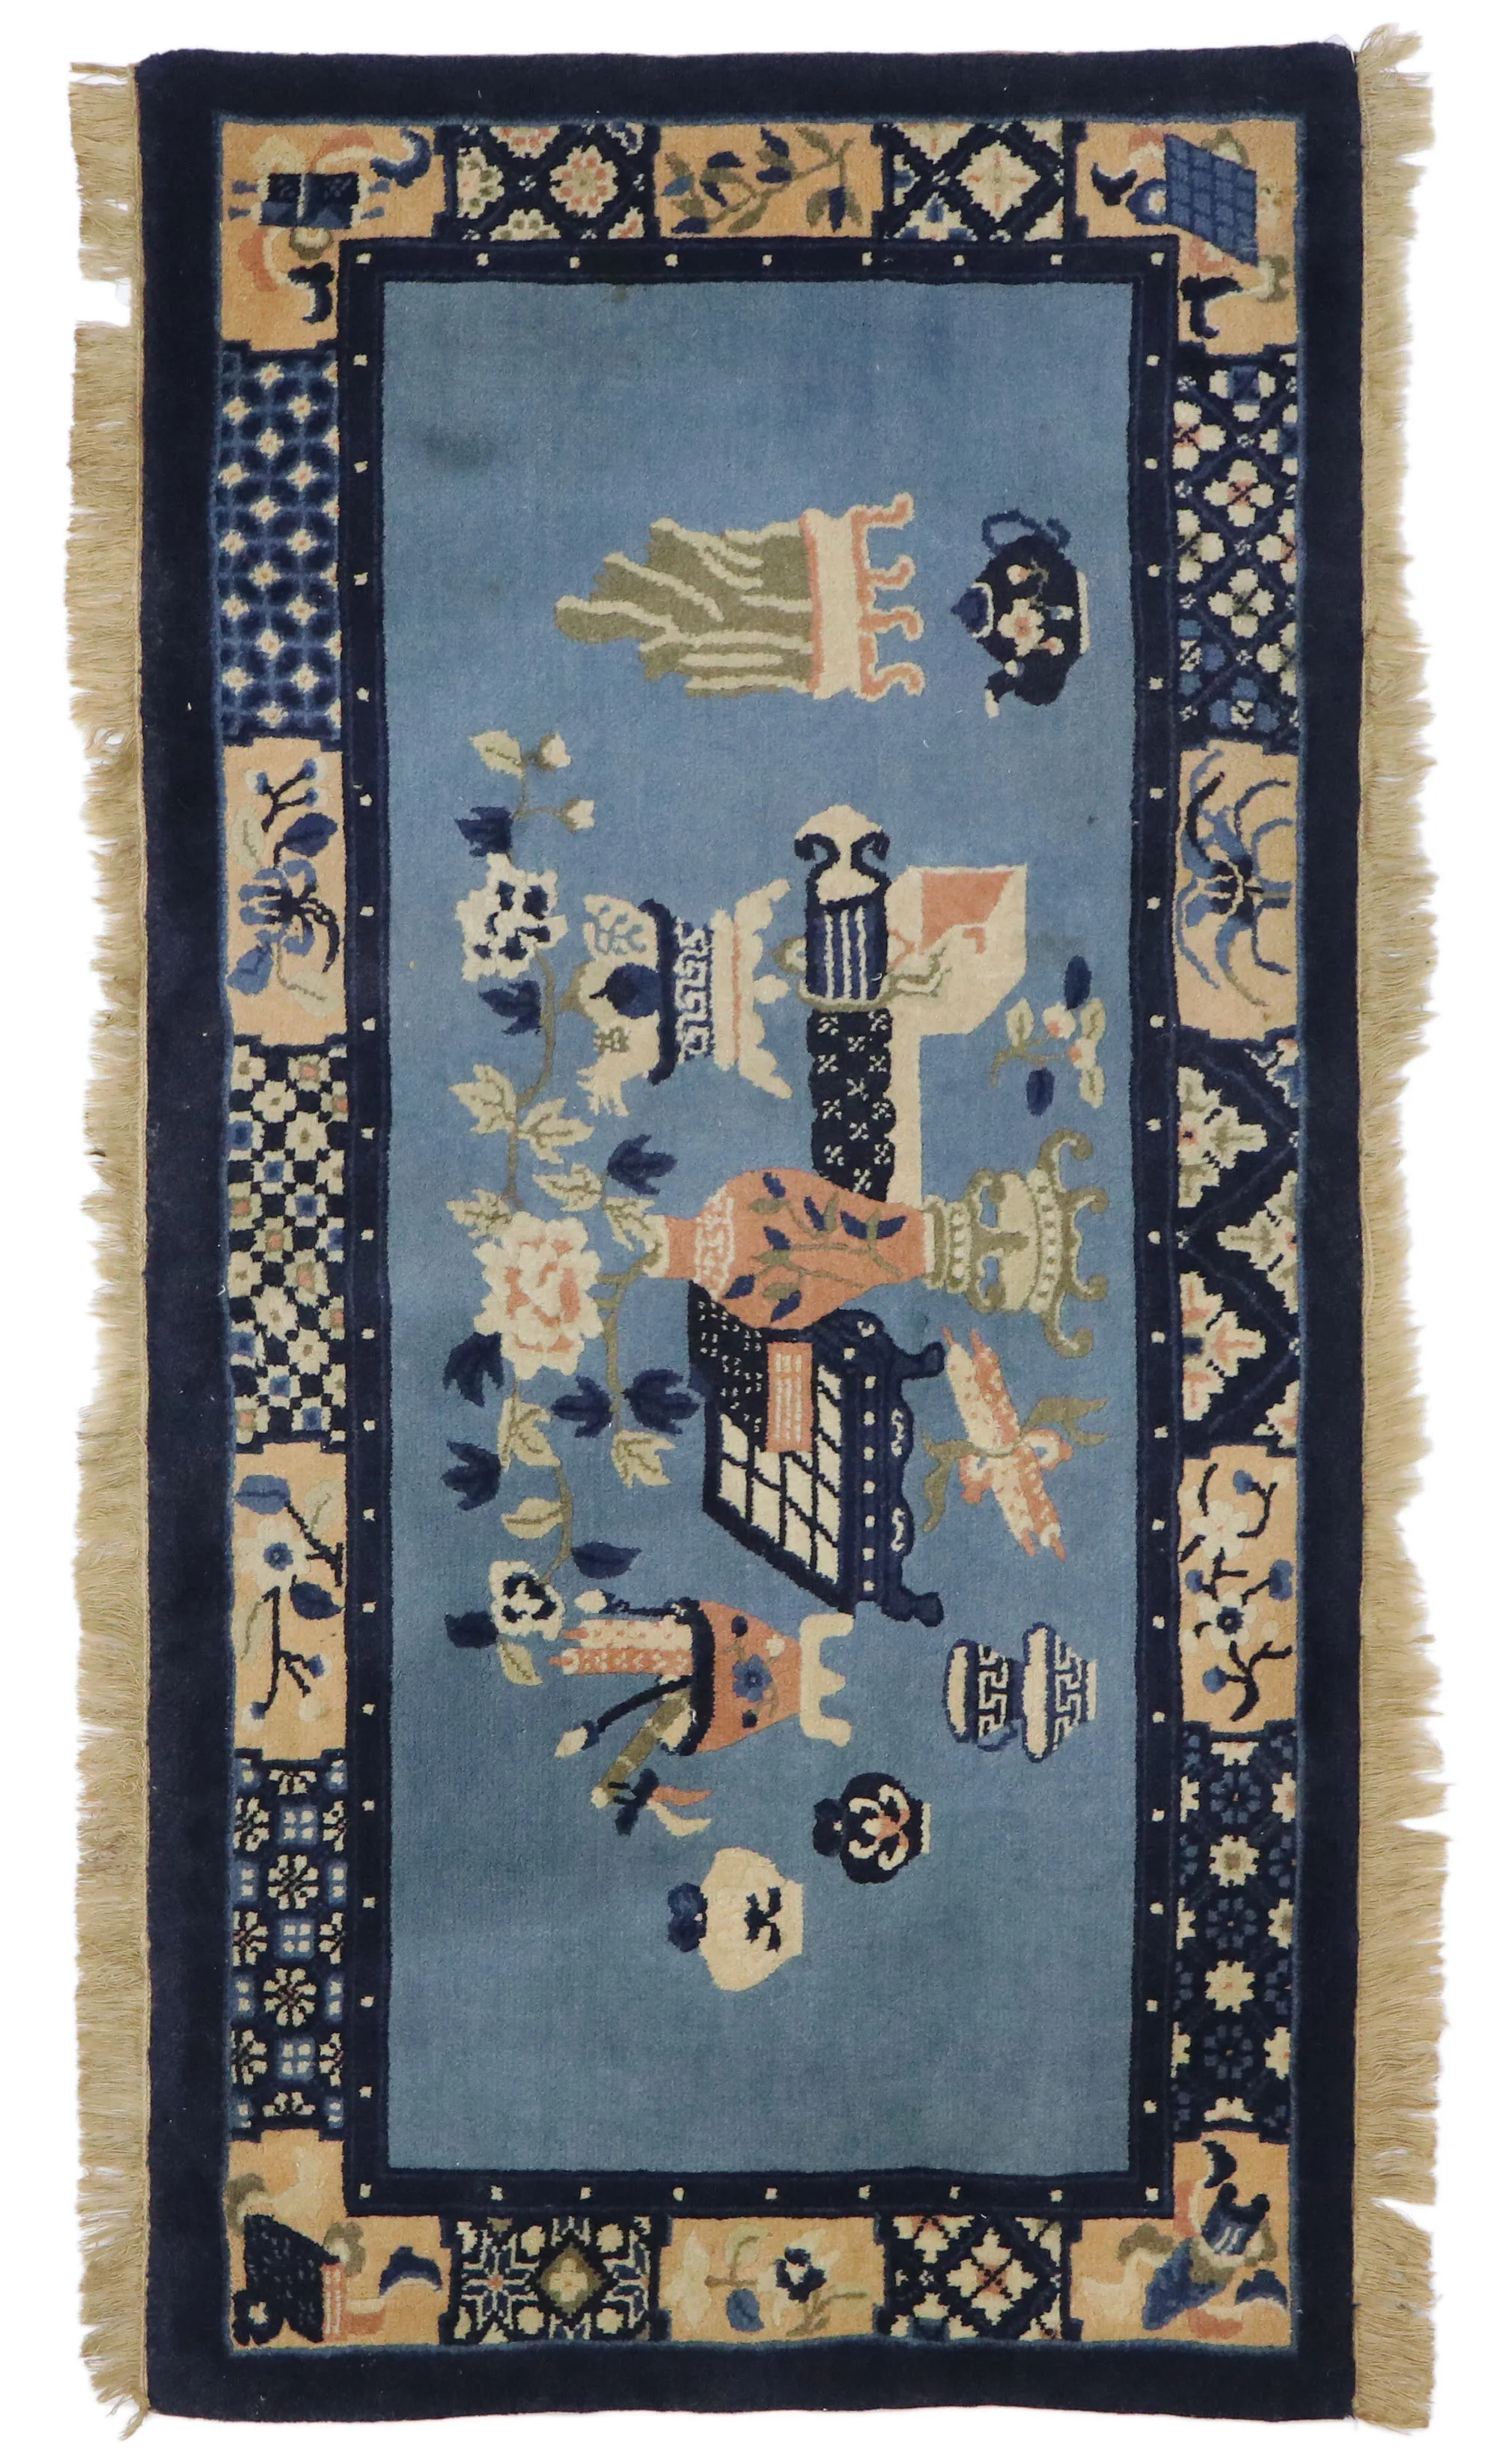 Chinese Baotou Pictorial Rug - 2'5 x 4'7 - Esmaili Rugs & Antiques - Blue - Blue